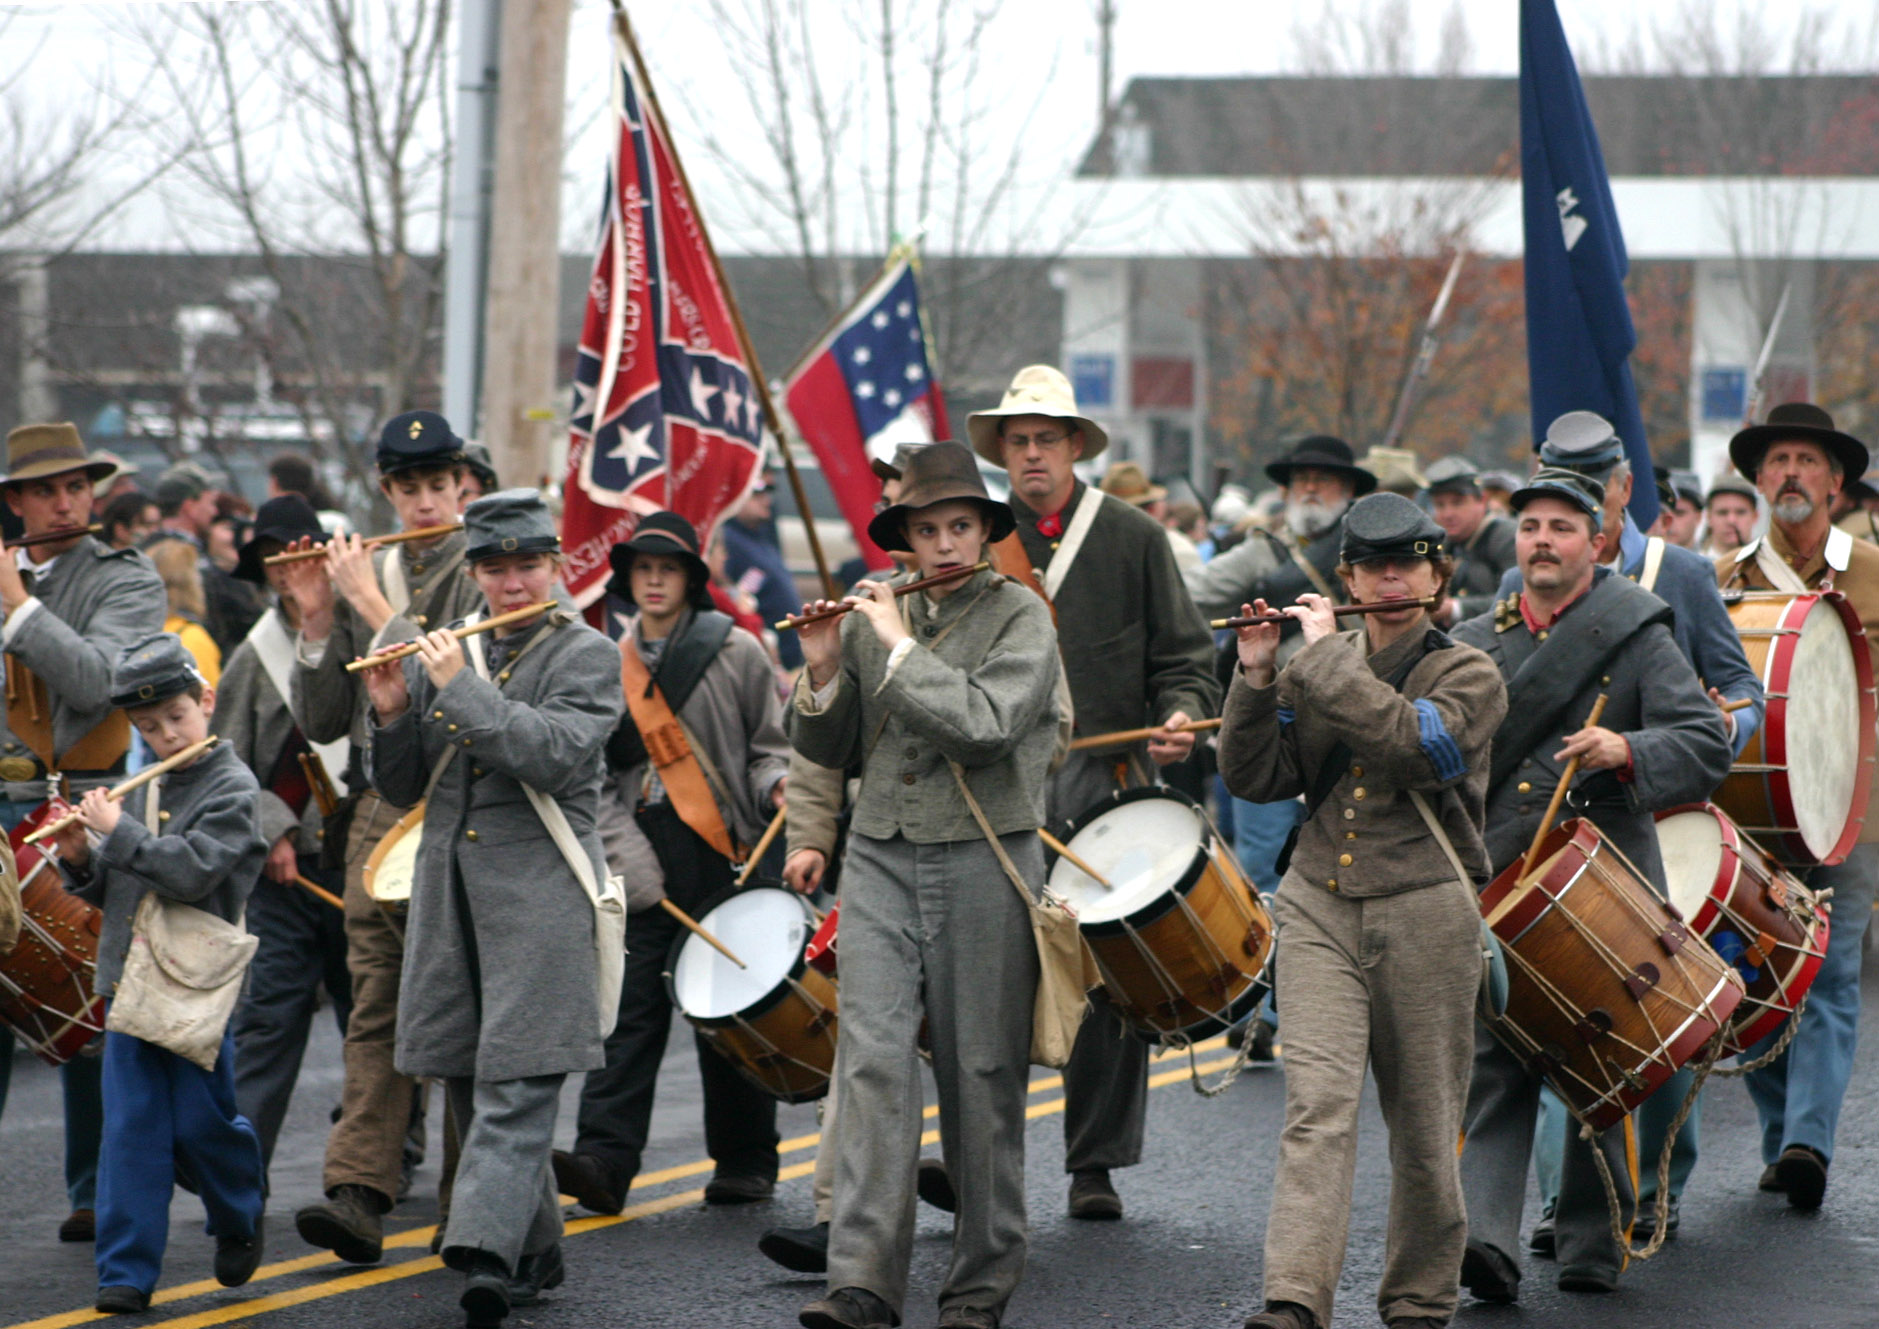 a parade with several people marching in the street